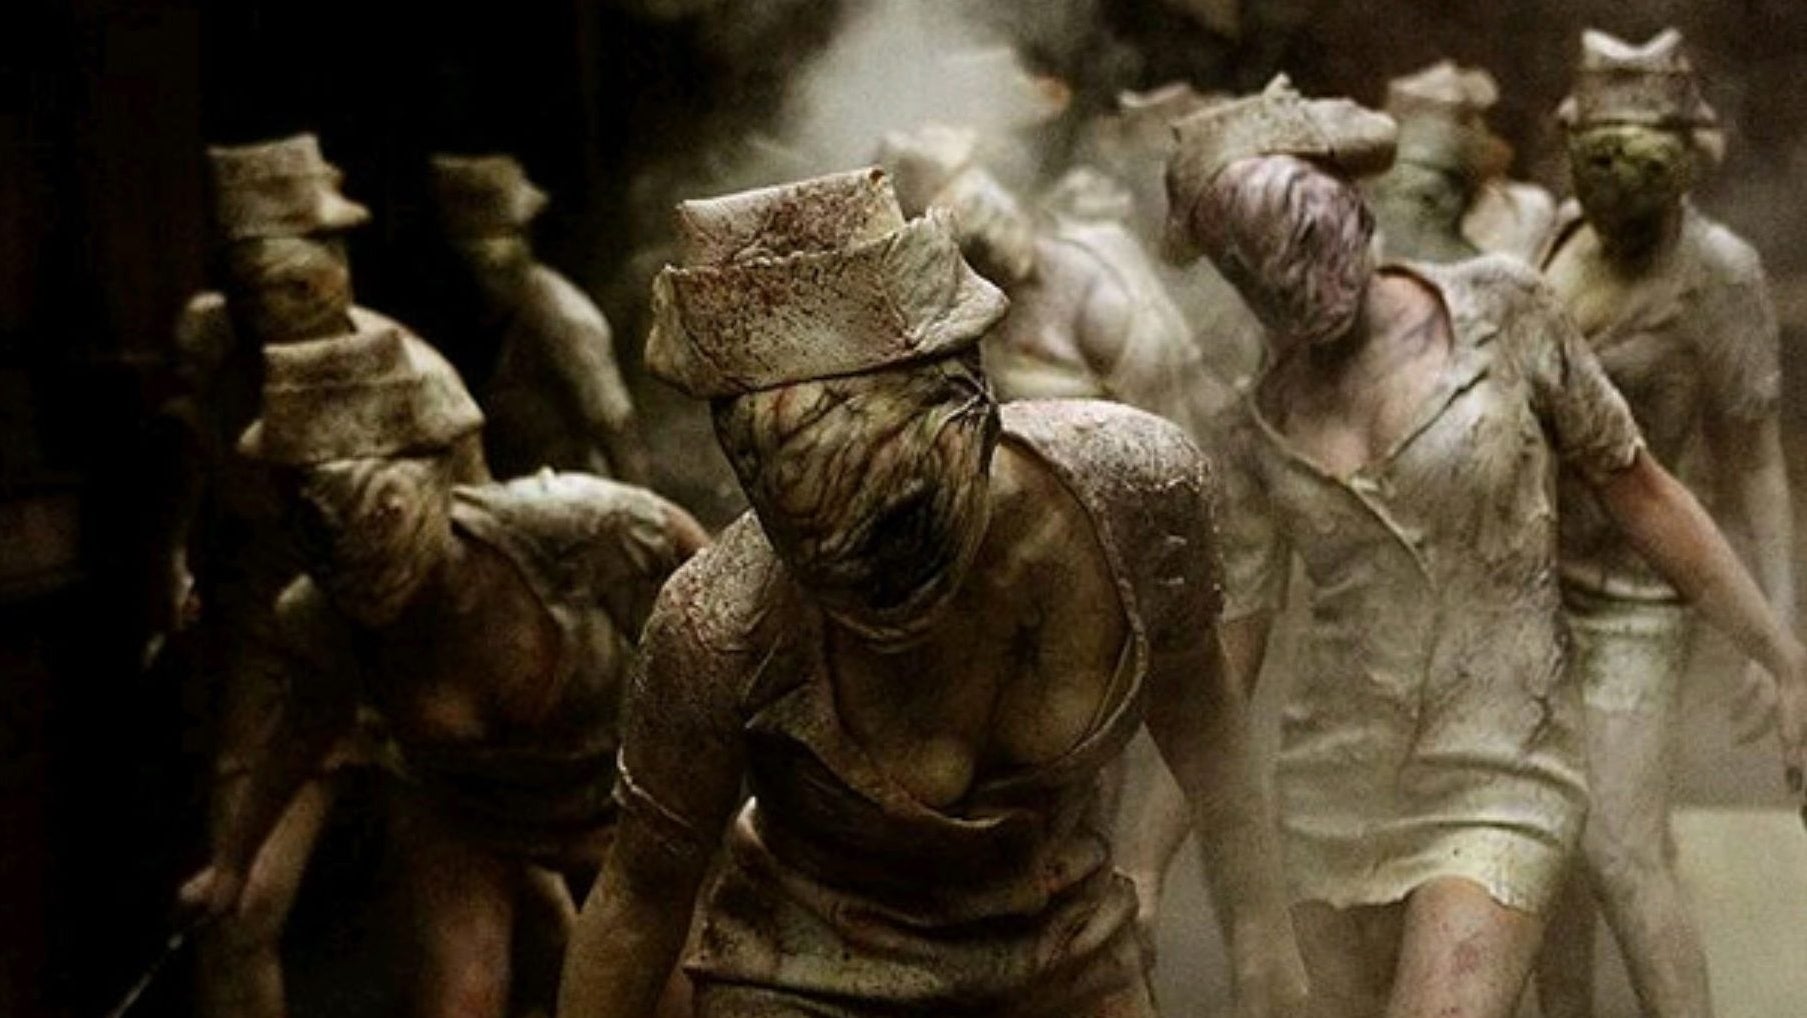 There's another Silent Hill movie in development | Eurogamer.net